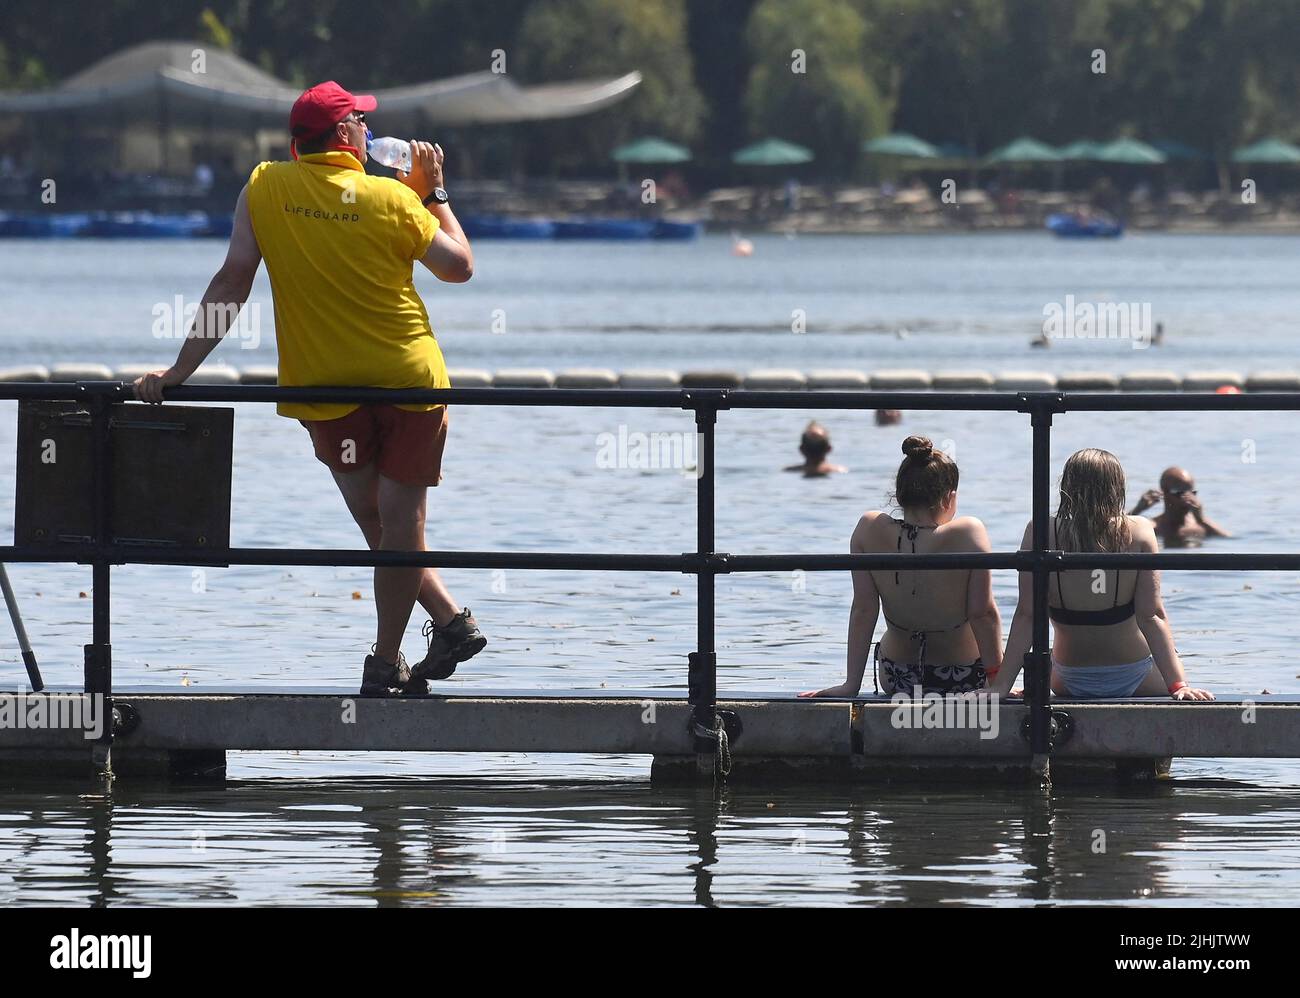 A lifeguard drinks water as people swim in the Serpentine Lake during hot weather in Hyde Park in London, Britain, July 19, 2022. REUTERS/Toby Melville Stock Photo